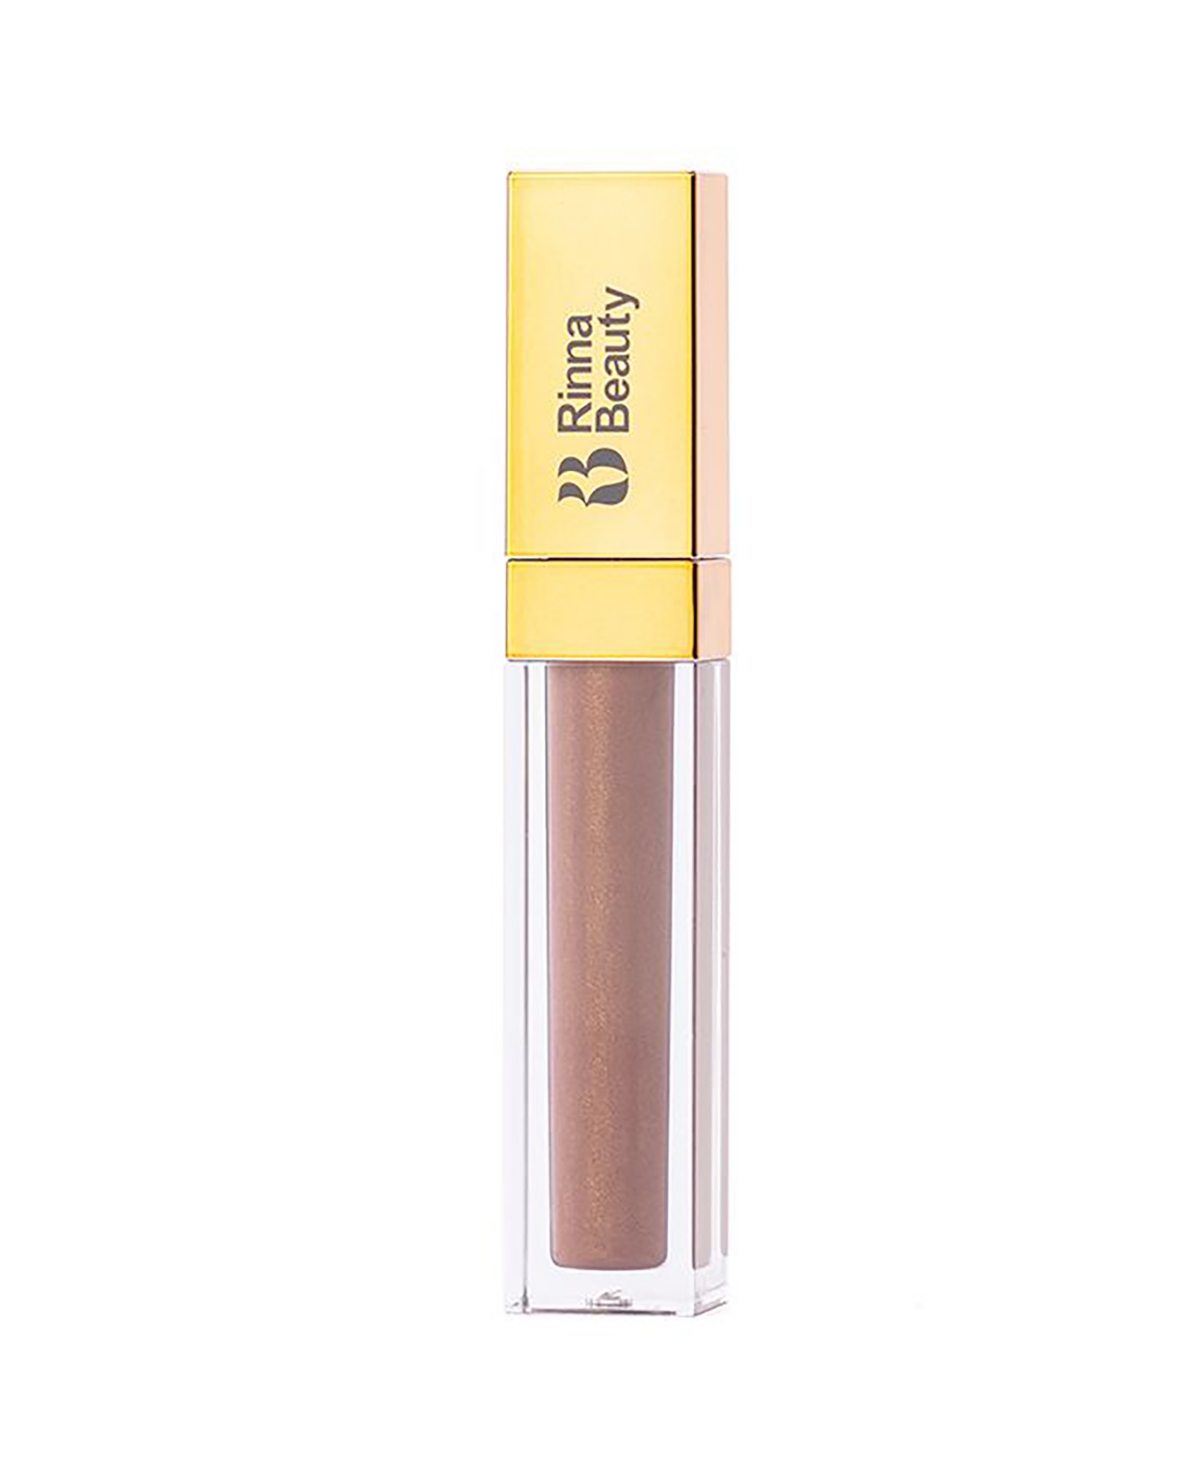 Rinna Beauty Larger Than Life All That Glitters Lip Plumping Gloss, 0.14 Oz. In Jet Setter (mauve)